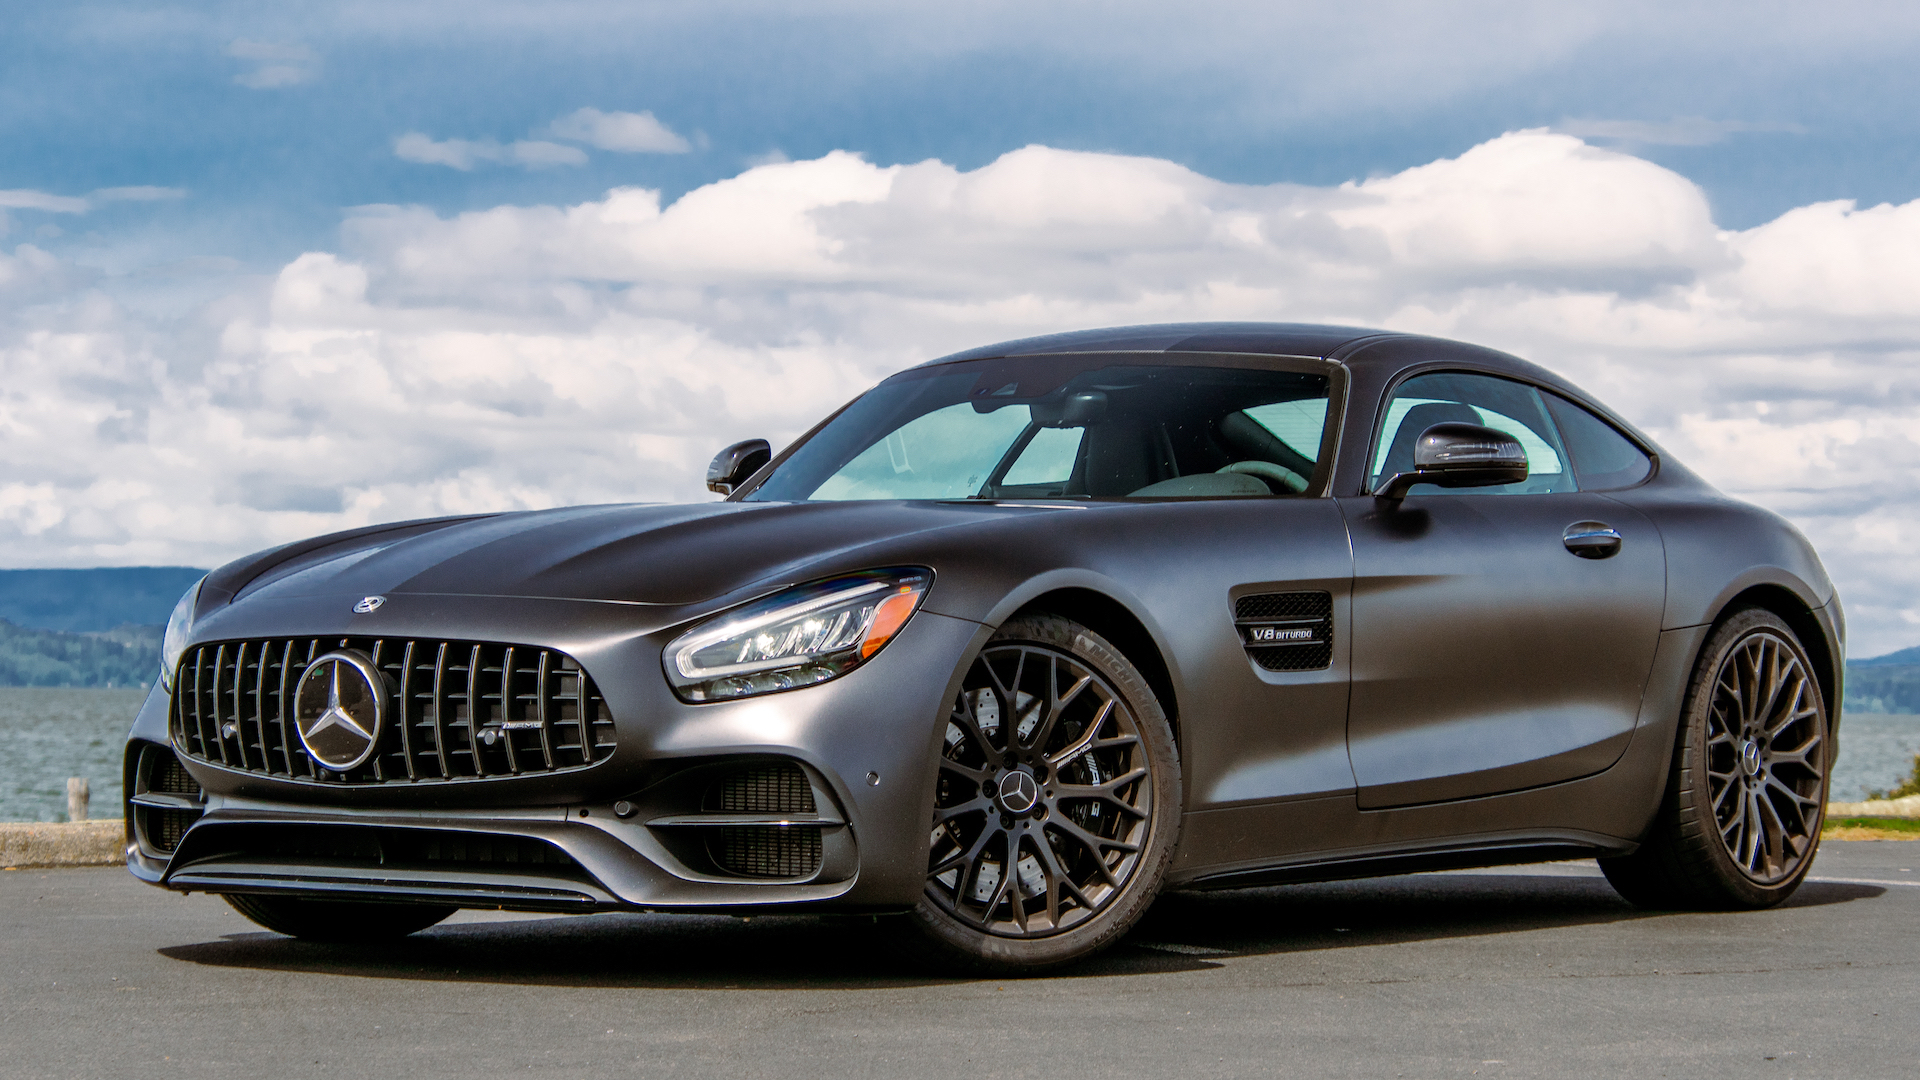 2020 Mercedes-AMG GT C Coupe Test: a Glorious Celebration of Speed